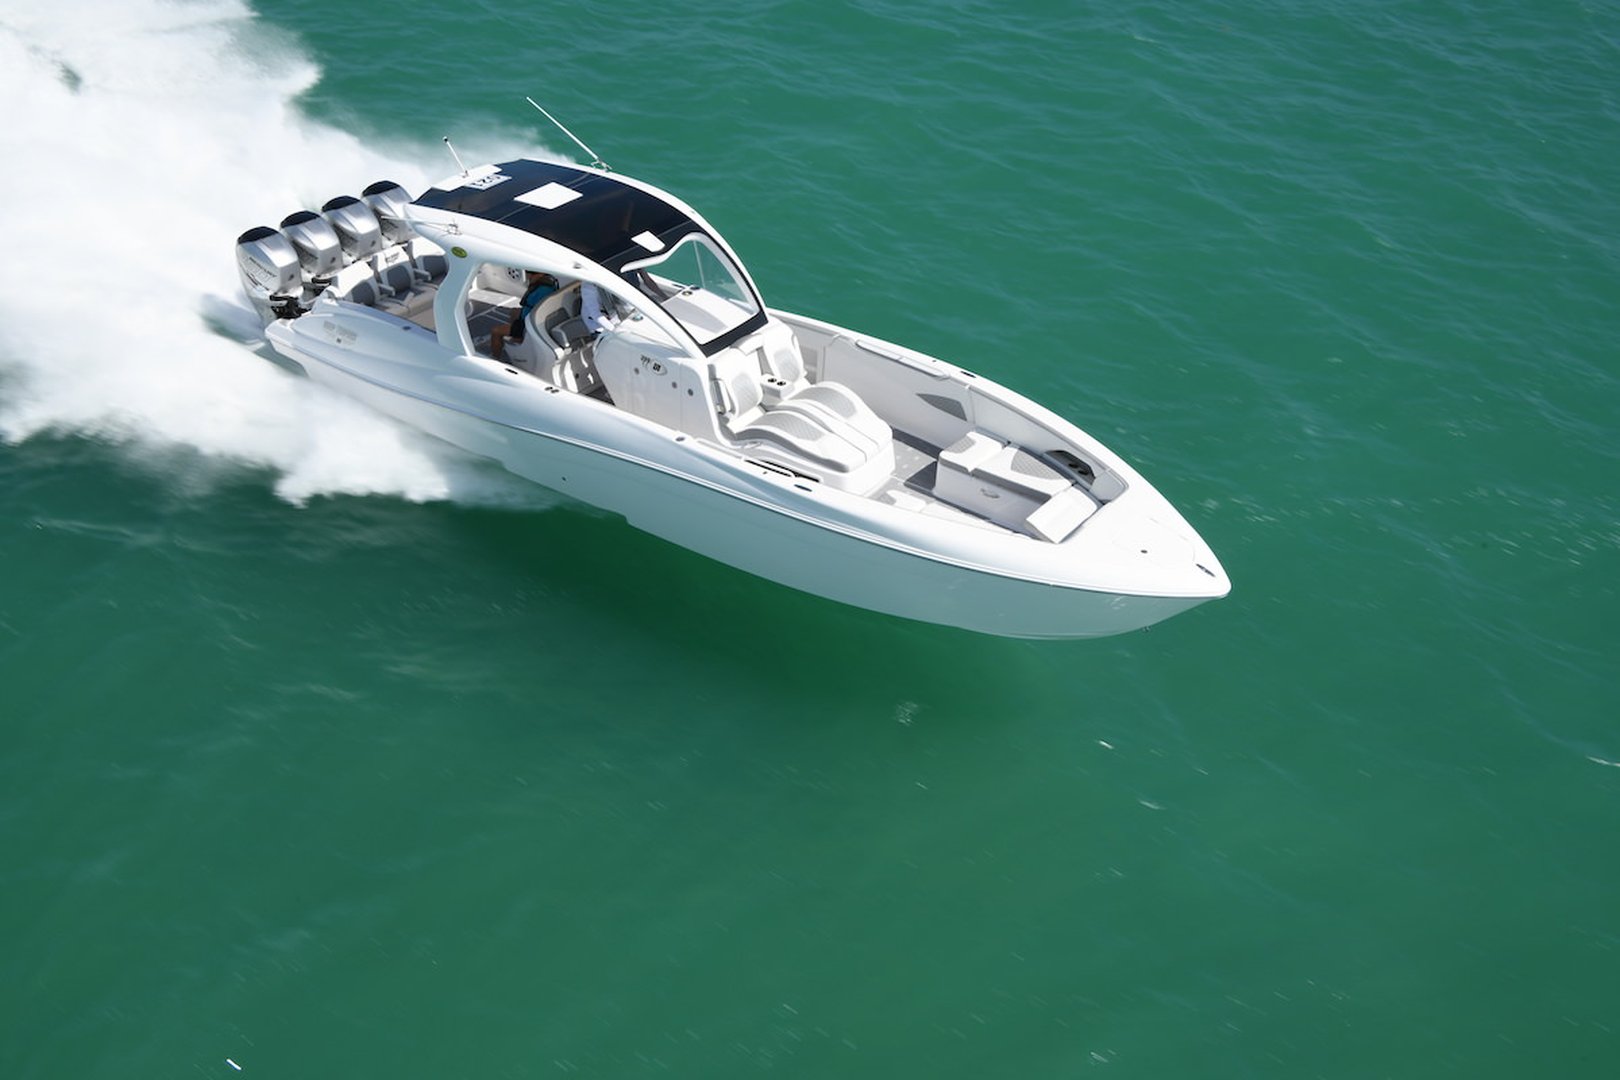 360 VR Virtual Tours of the Deep Impact 399 Sport